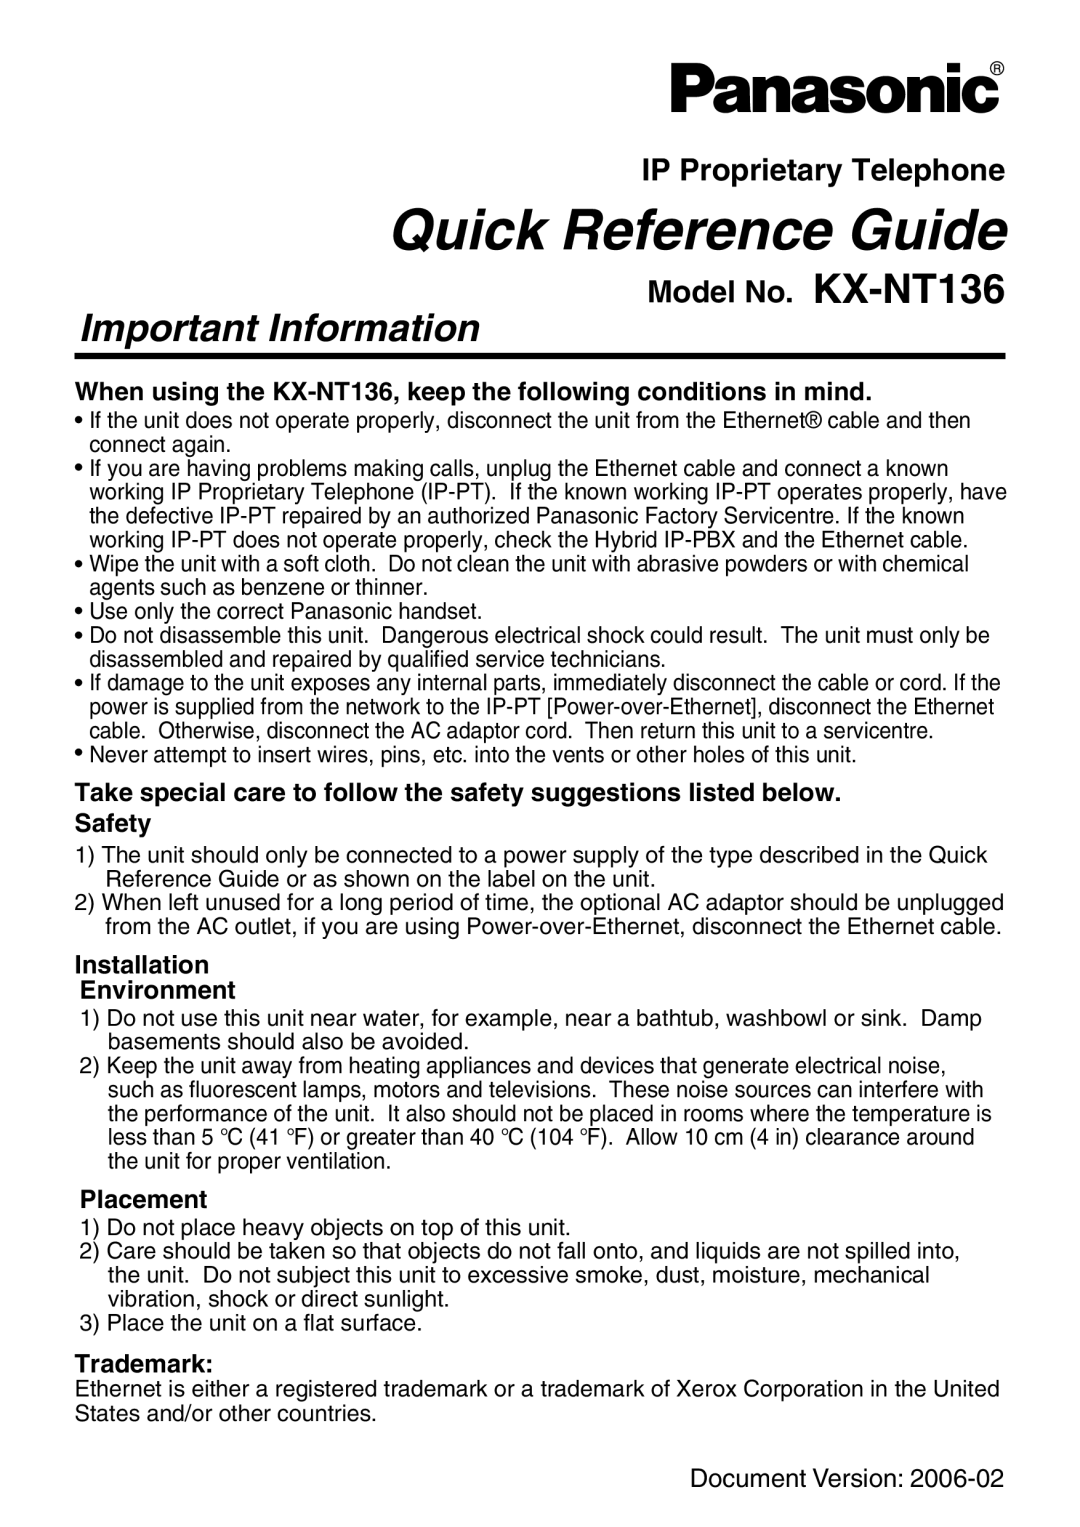 Panasonic manual Important Information, When using the KX-NT136, keep the following conditions in mind, Placement 